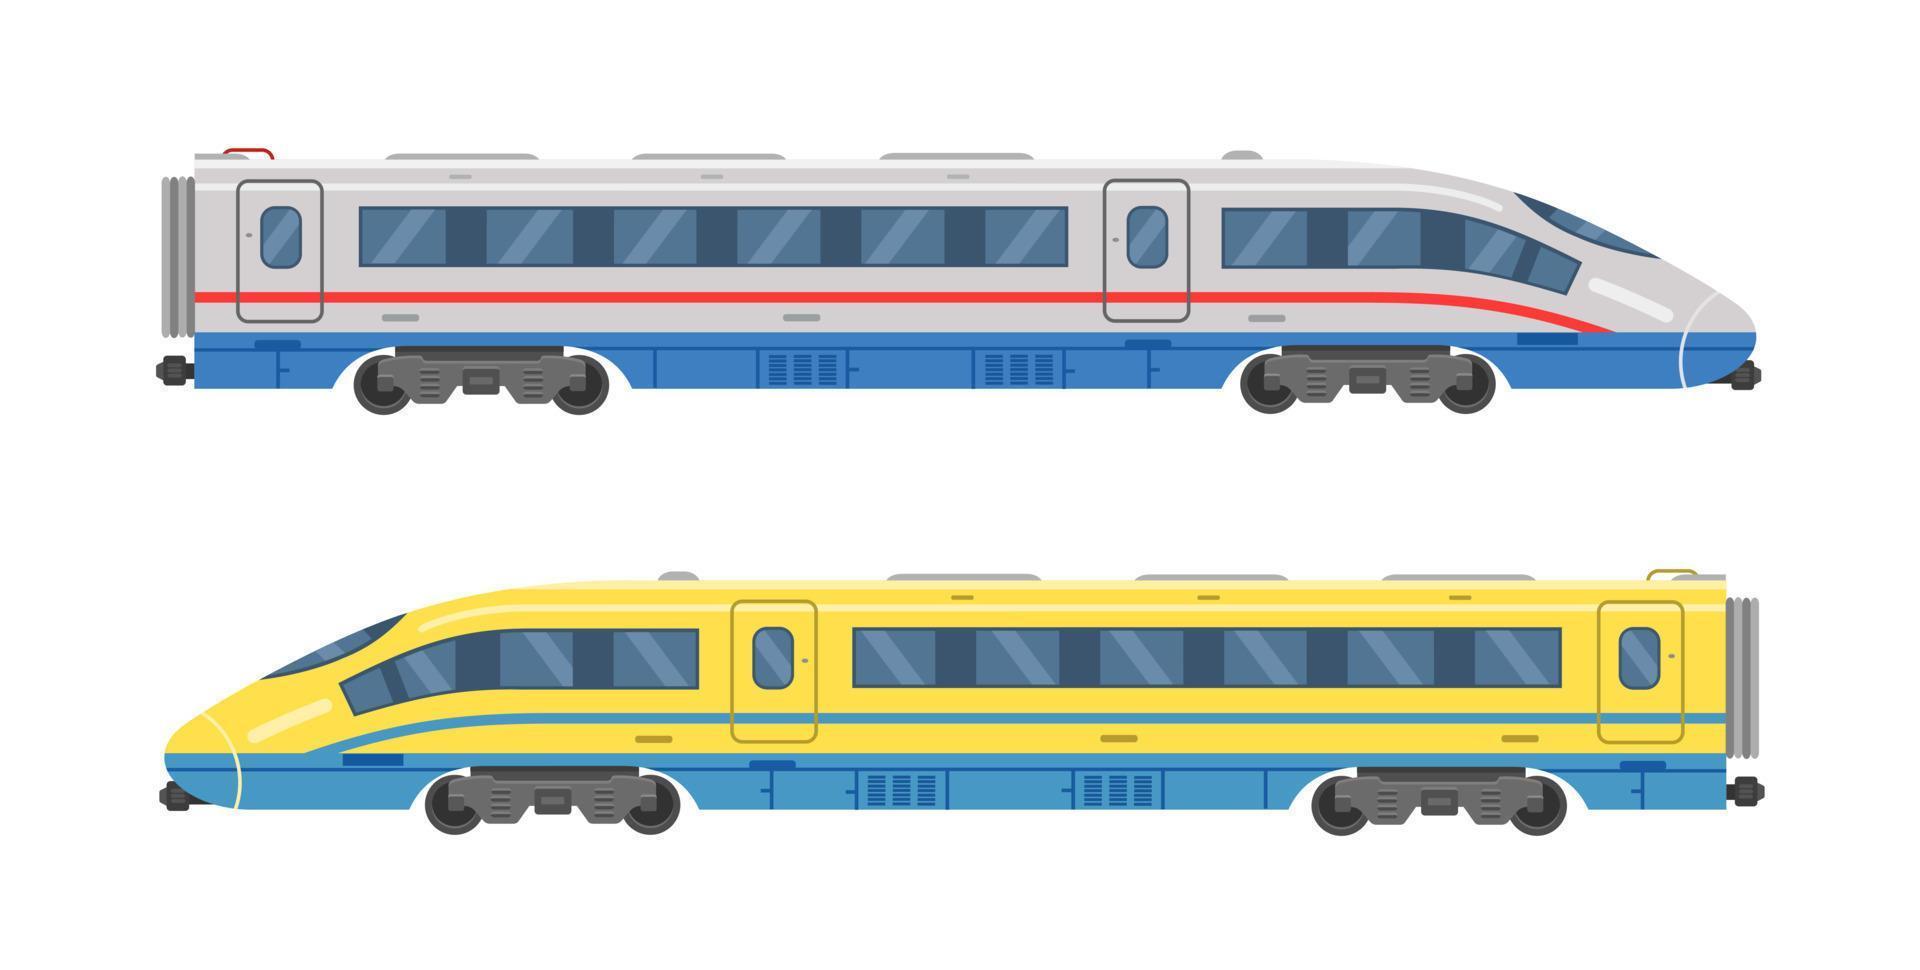 High-speed train or passenger express in two colors. Vector illustration isolated on white background.